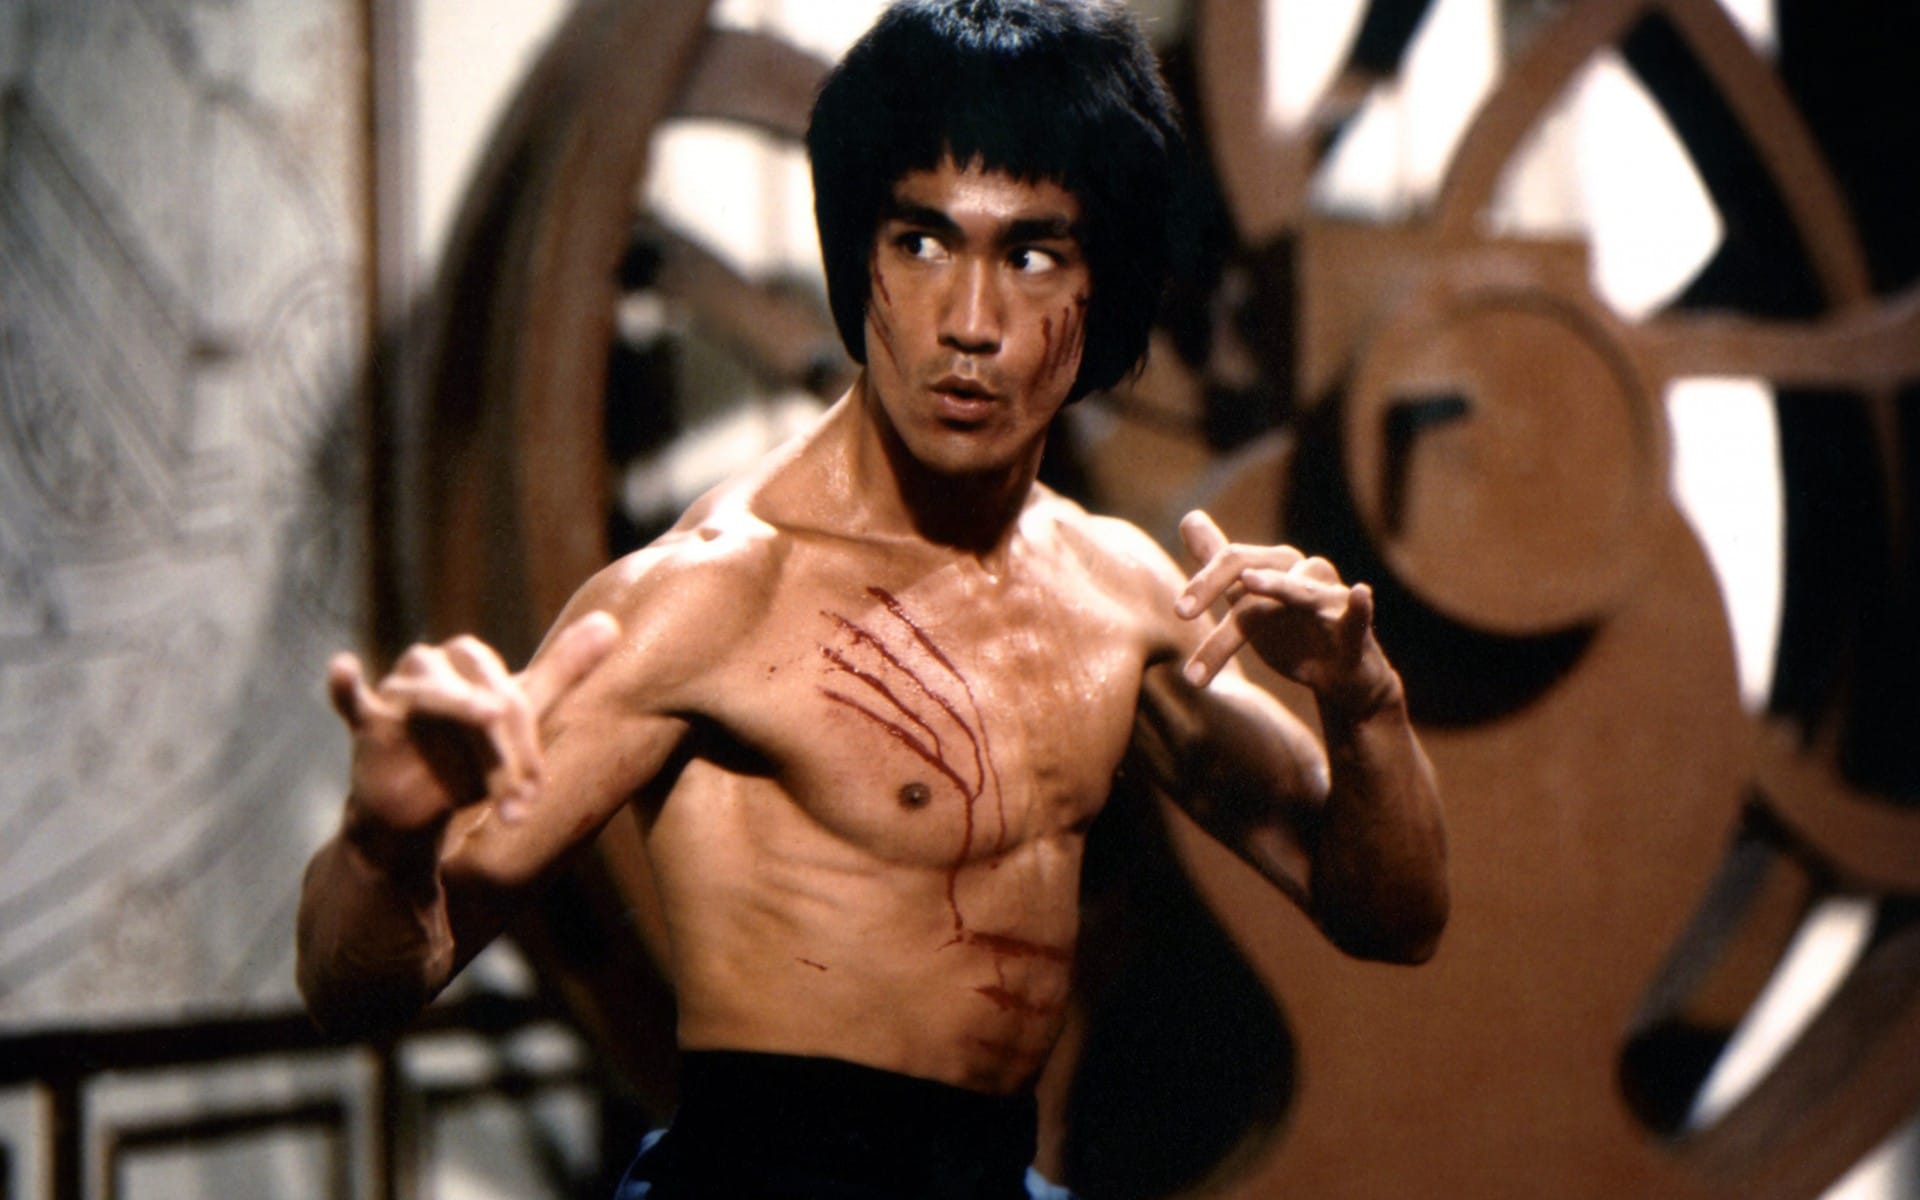 The Bruce Lee Workout That Made His Rig Famous